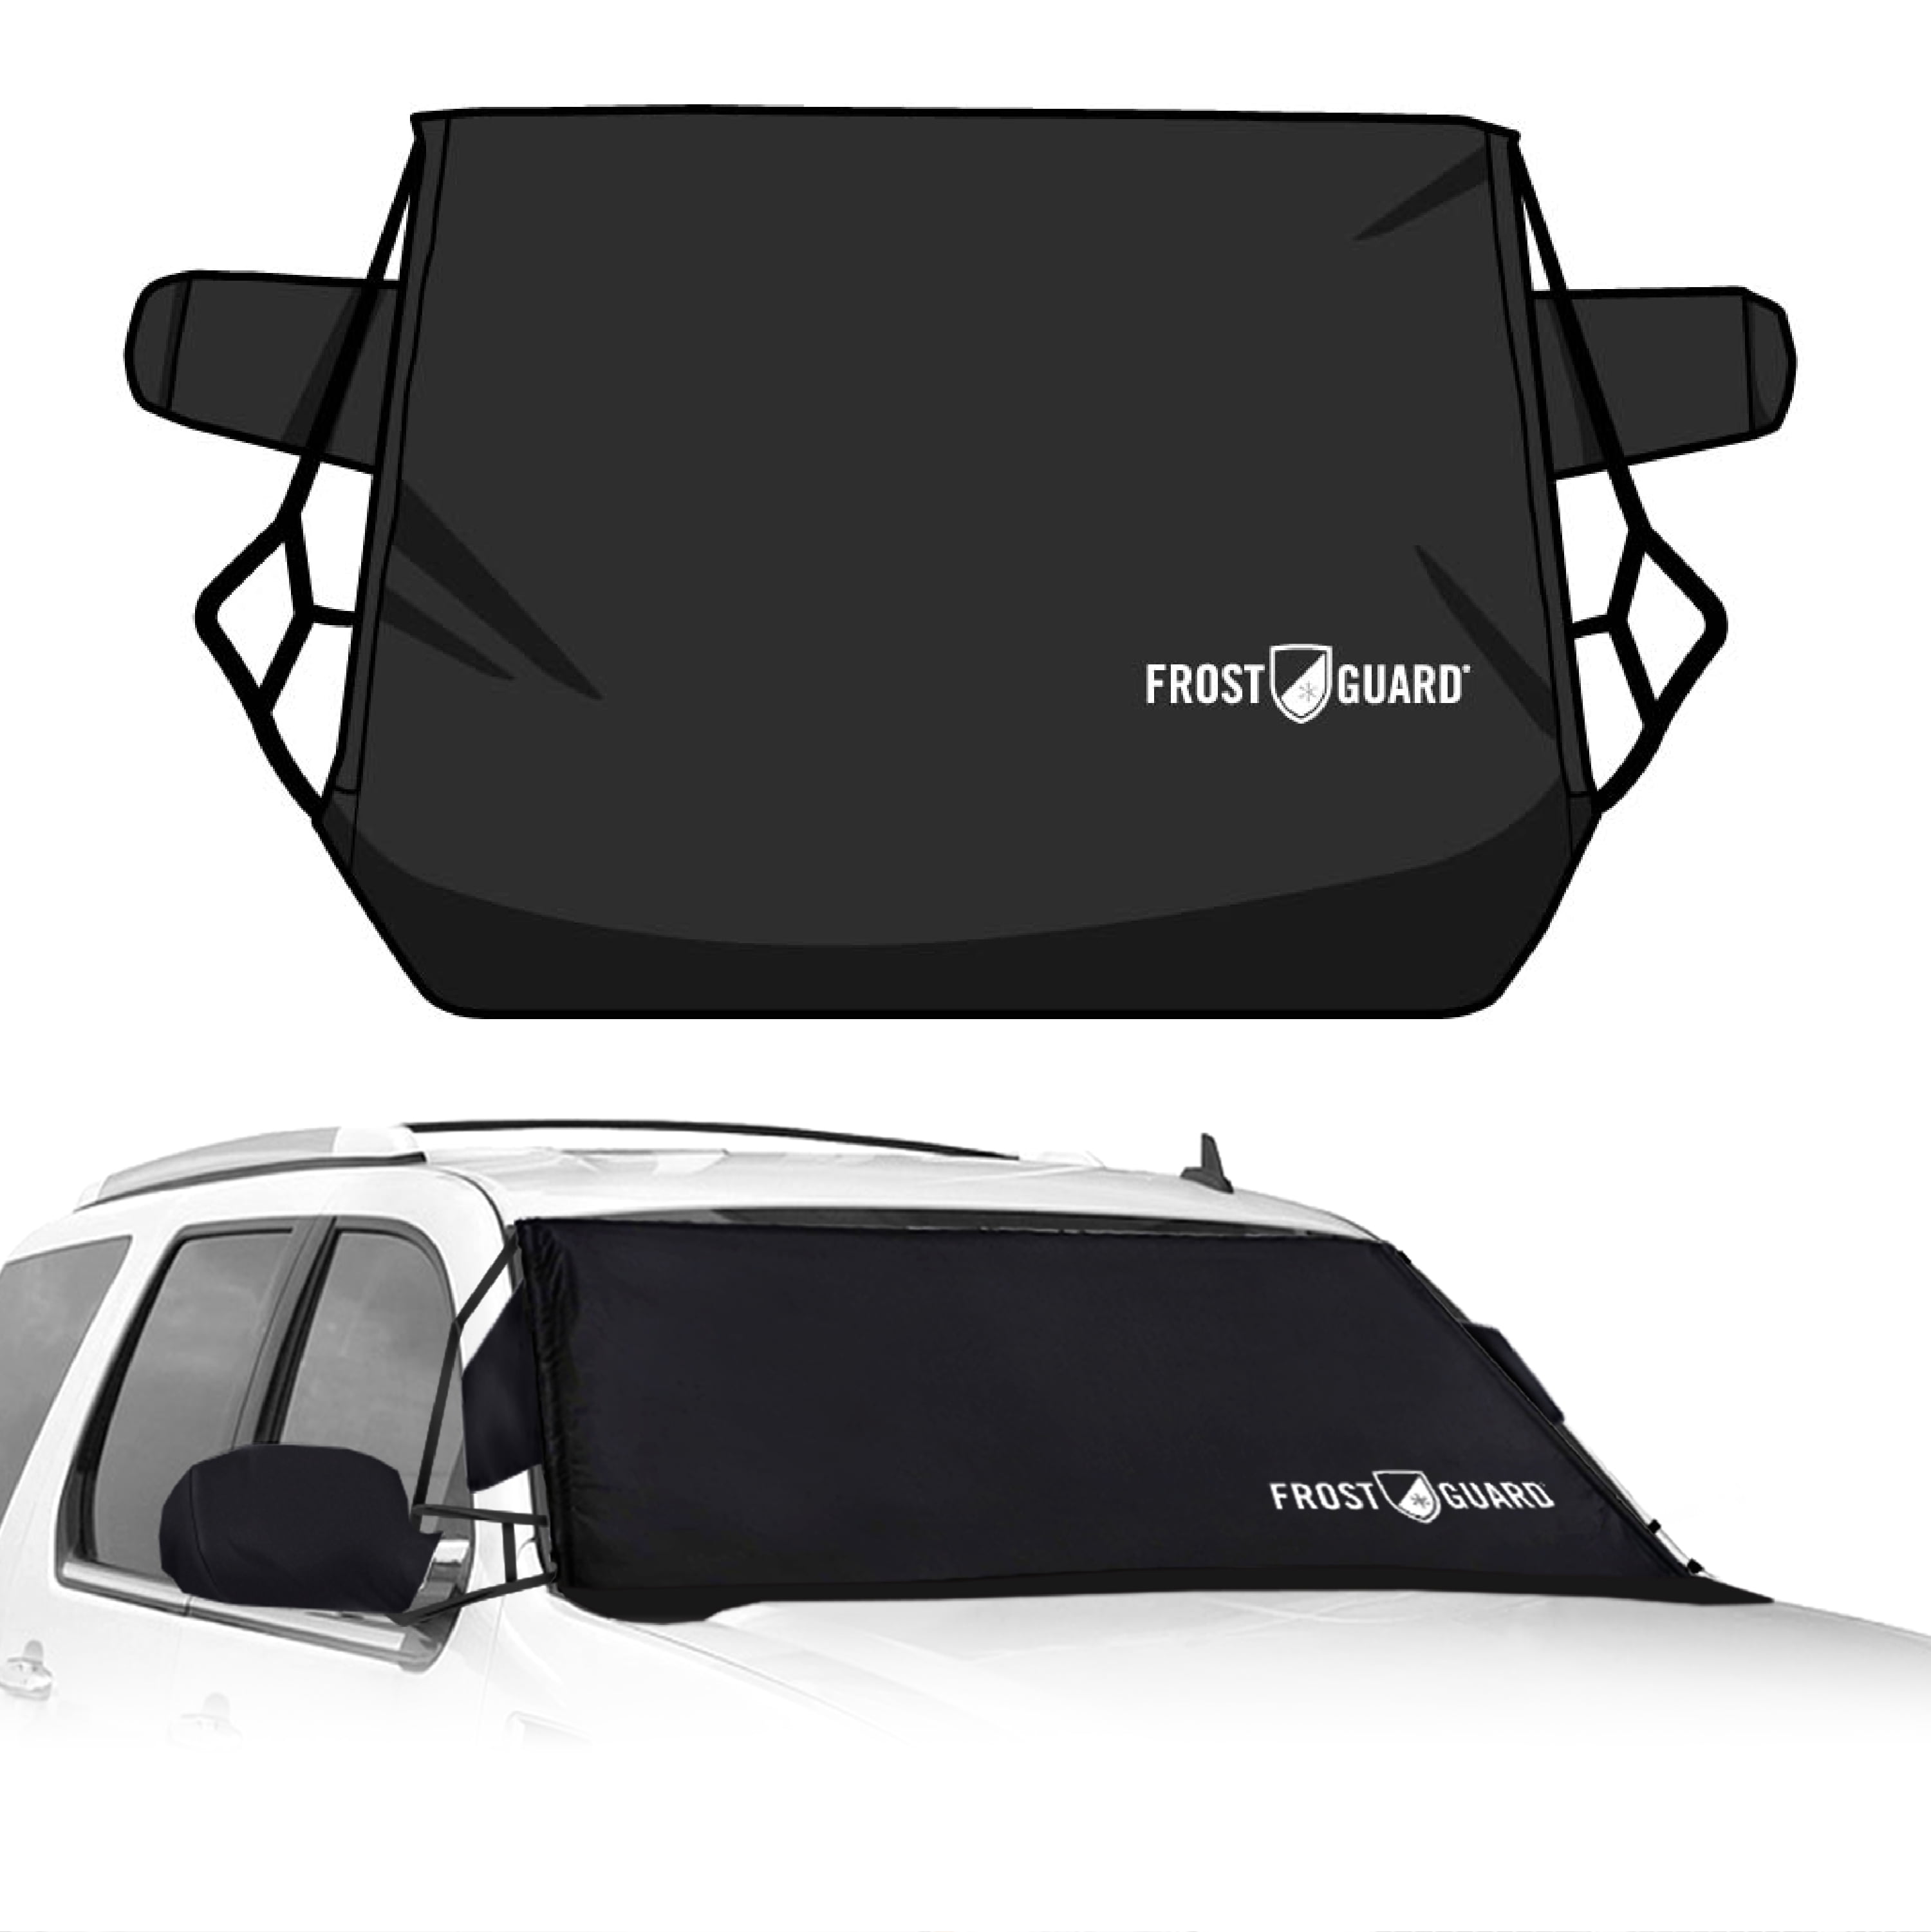 FrostGuard Deluxe Full-Coverage Car Windshield Cover for Ice